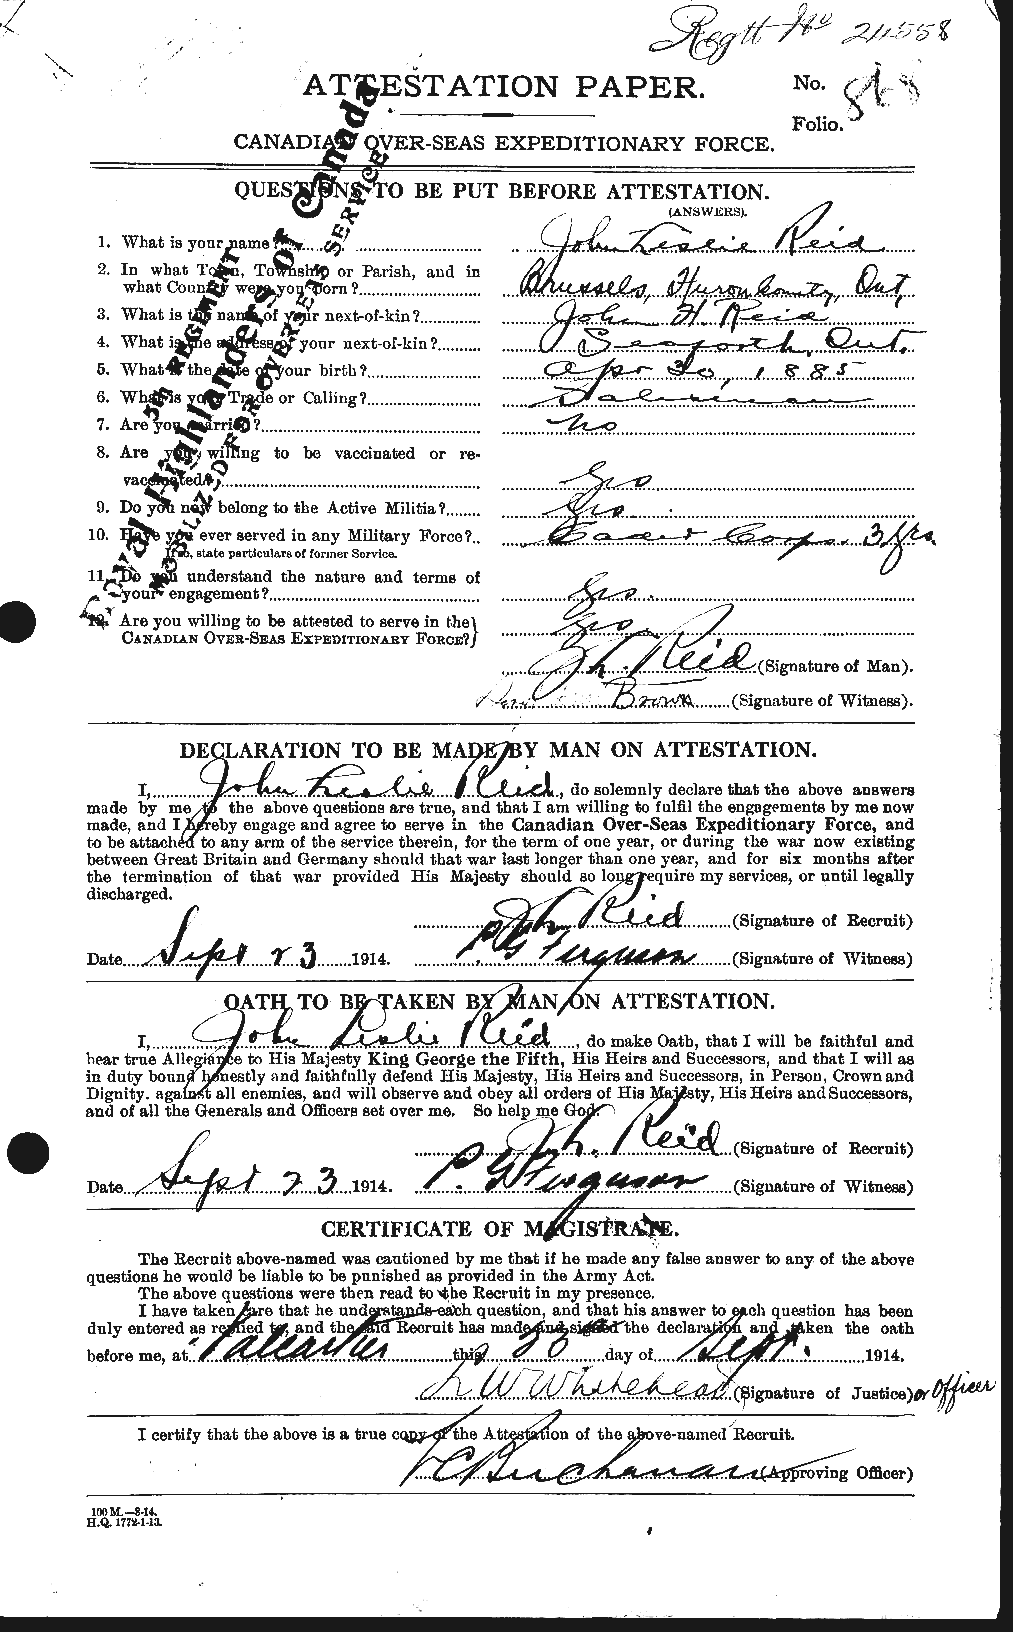 Personnel Records of the First World War - CEF 598852a